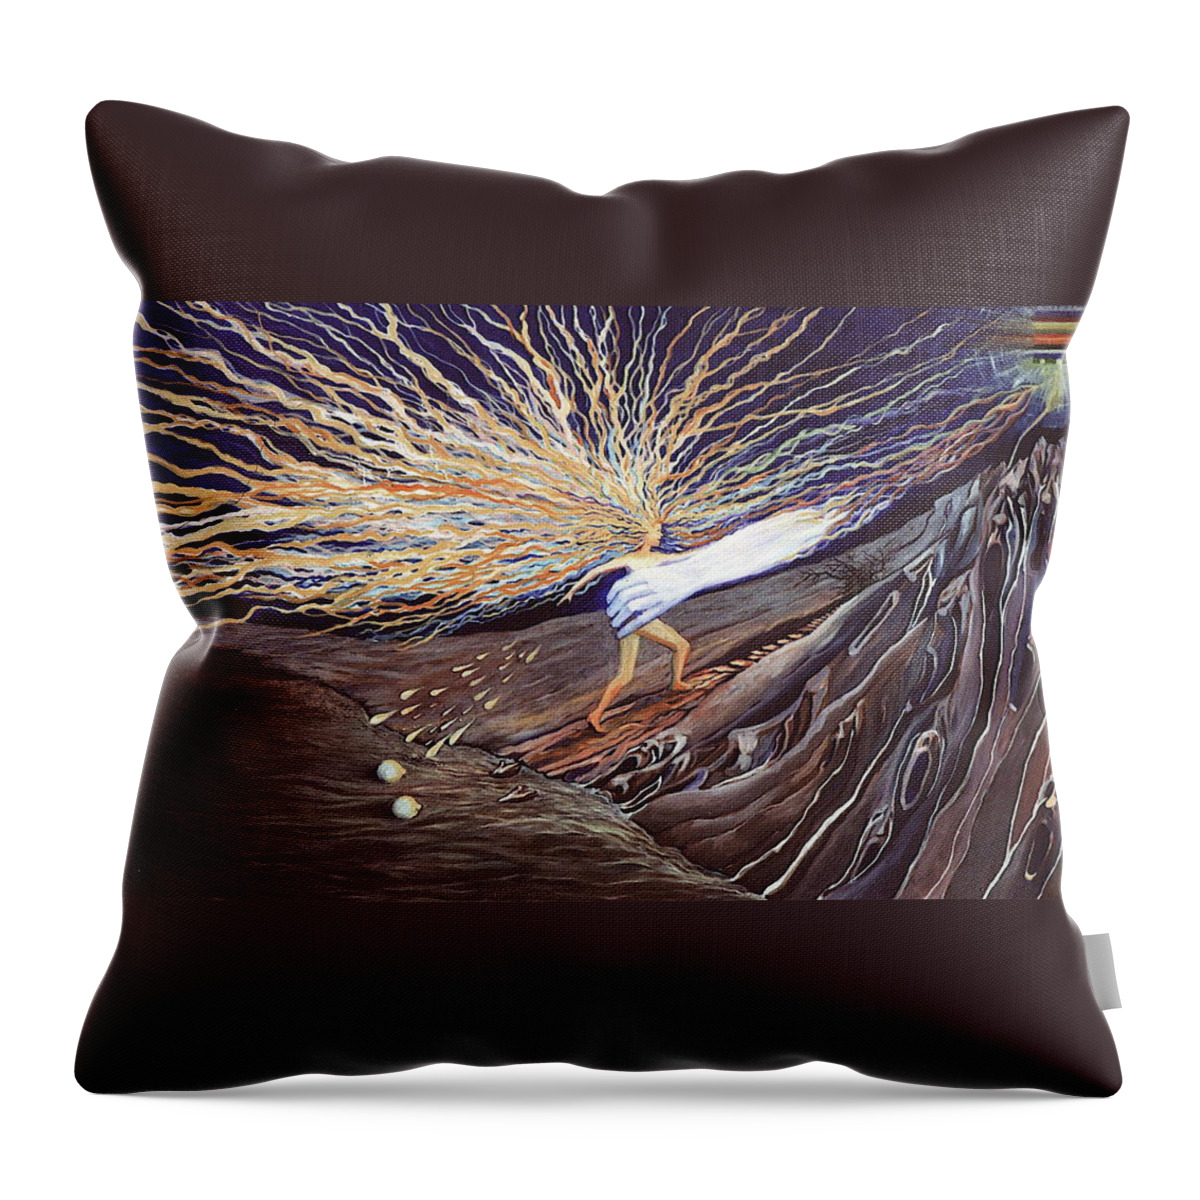 Christian Throw Pillow featuring the painting Out of the Miry Clay by Jeanette Jarmon